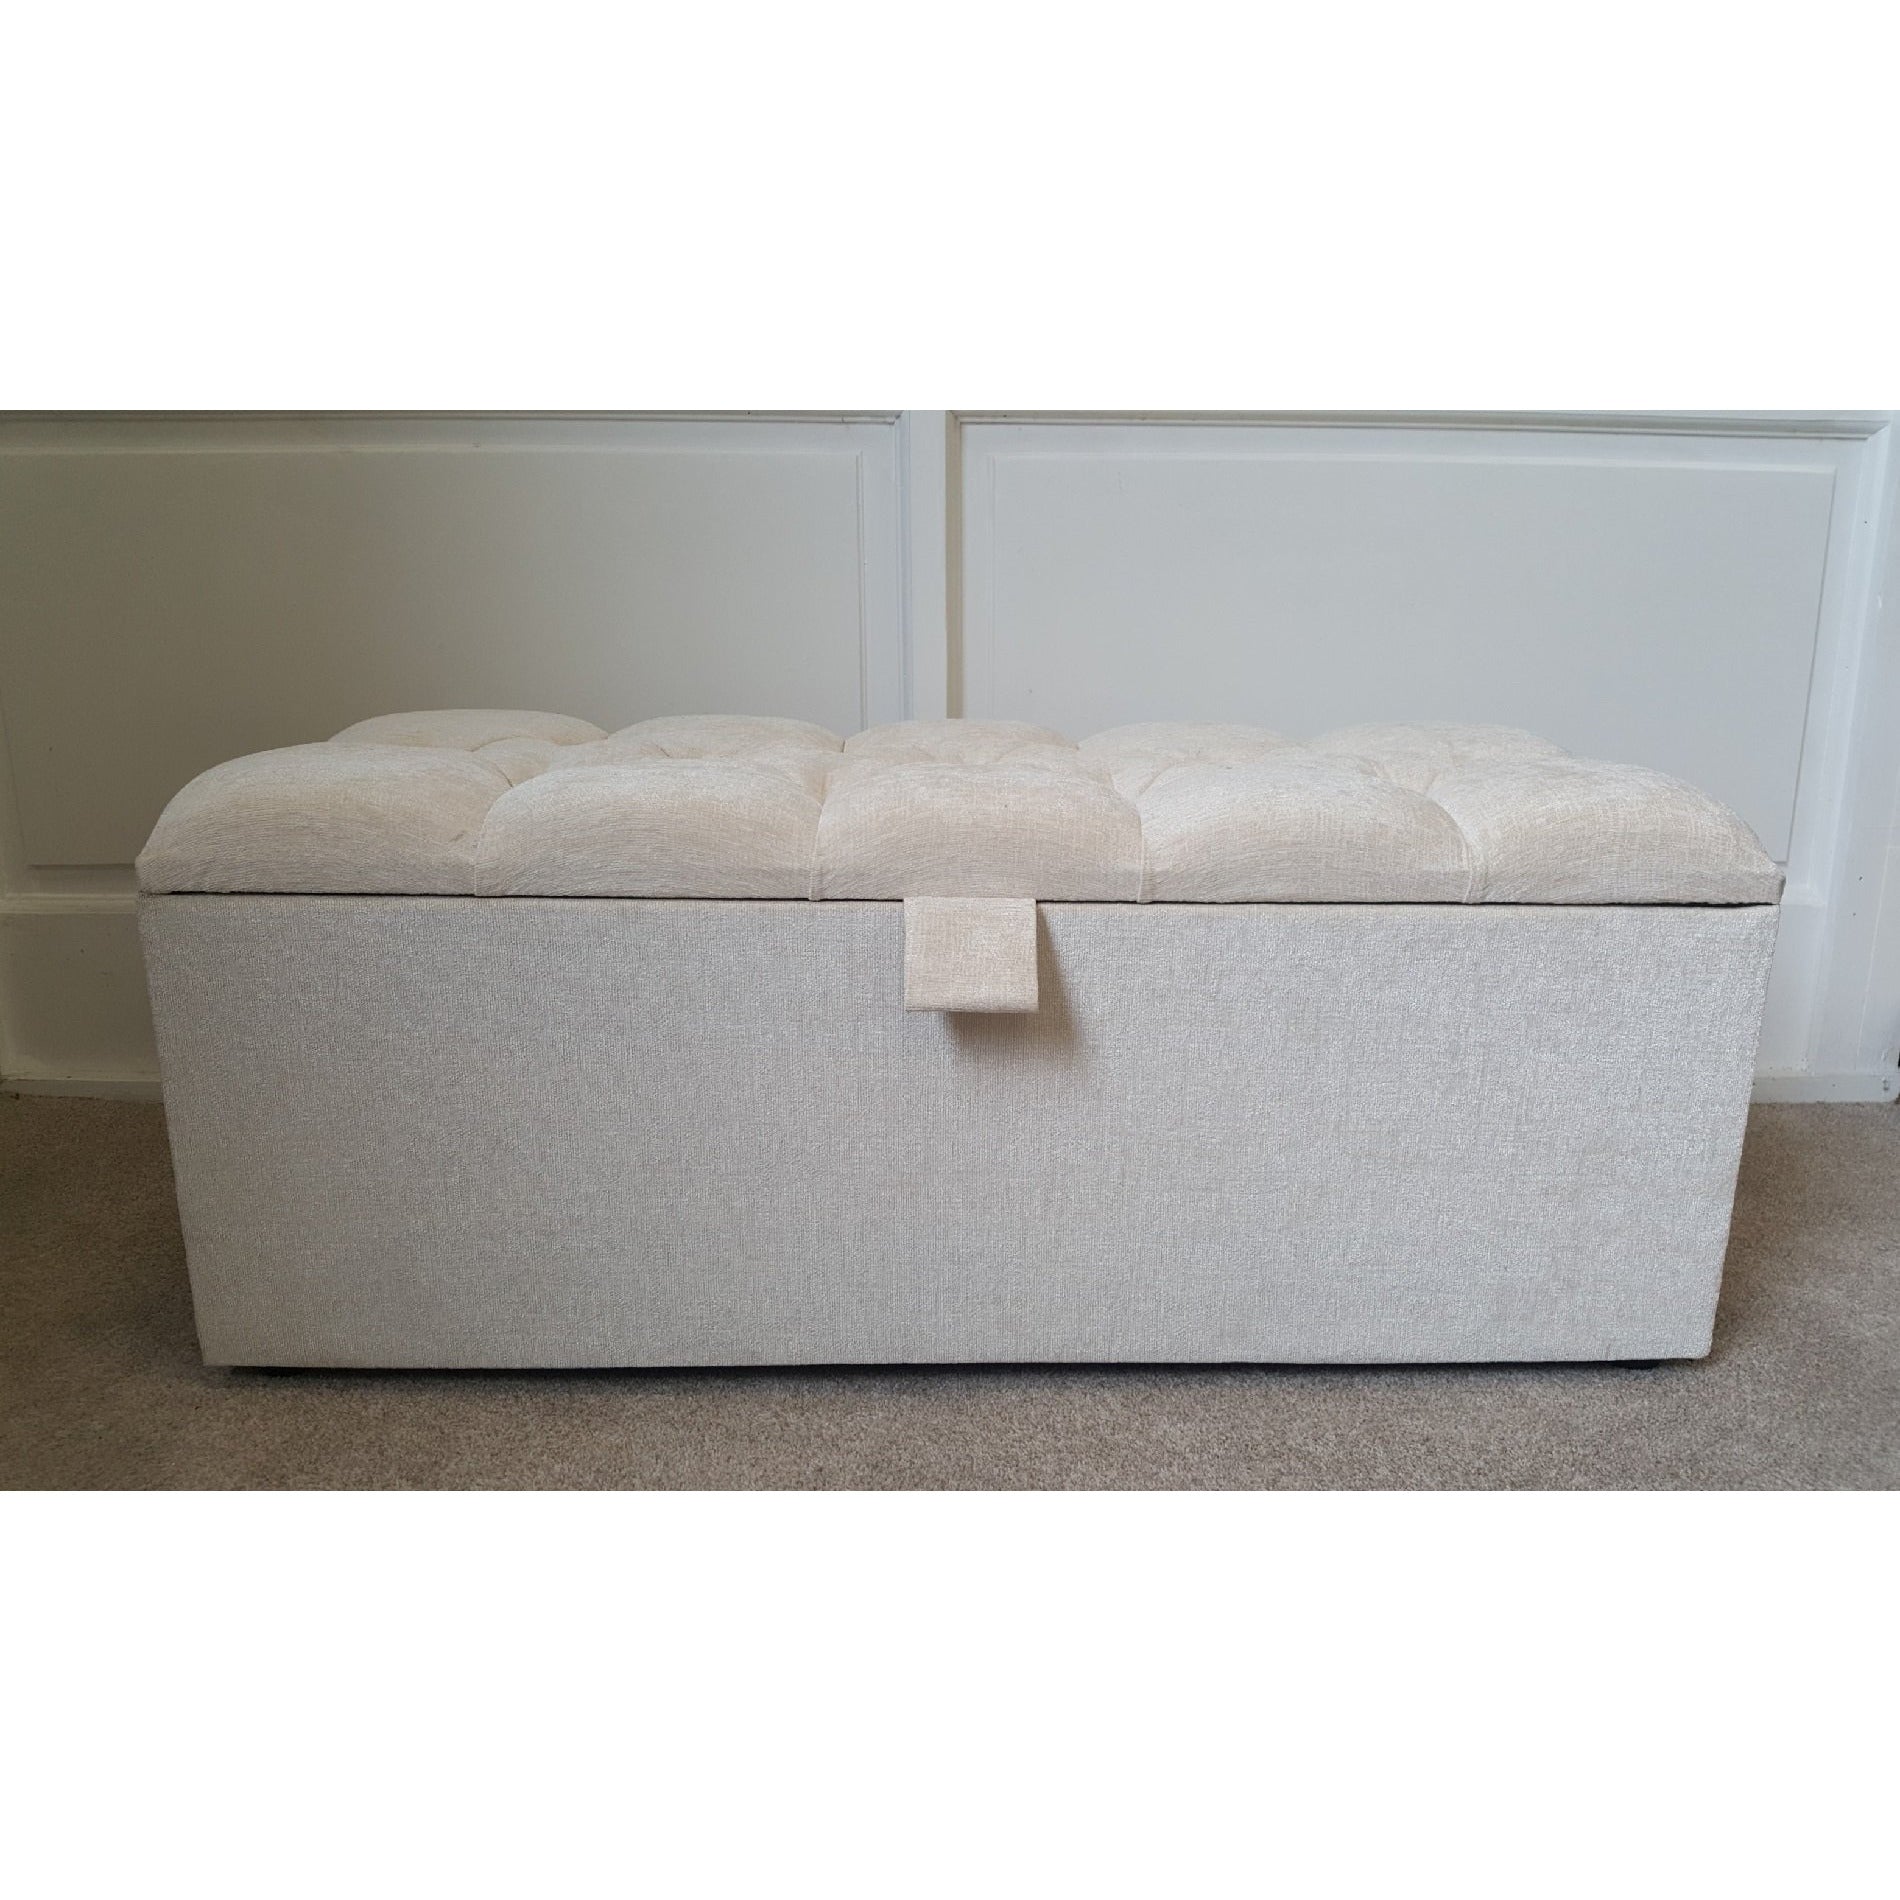 Parisian 4ft  Blanket Box from Upstairs Downstairs Furniture in Lisburn, Monaghan and Enniskillen